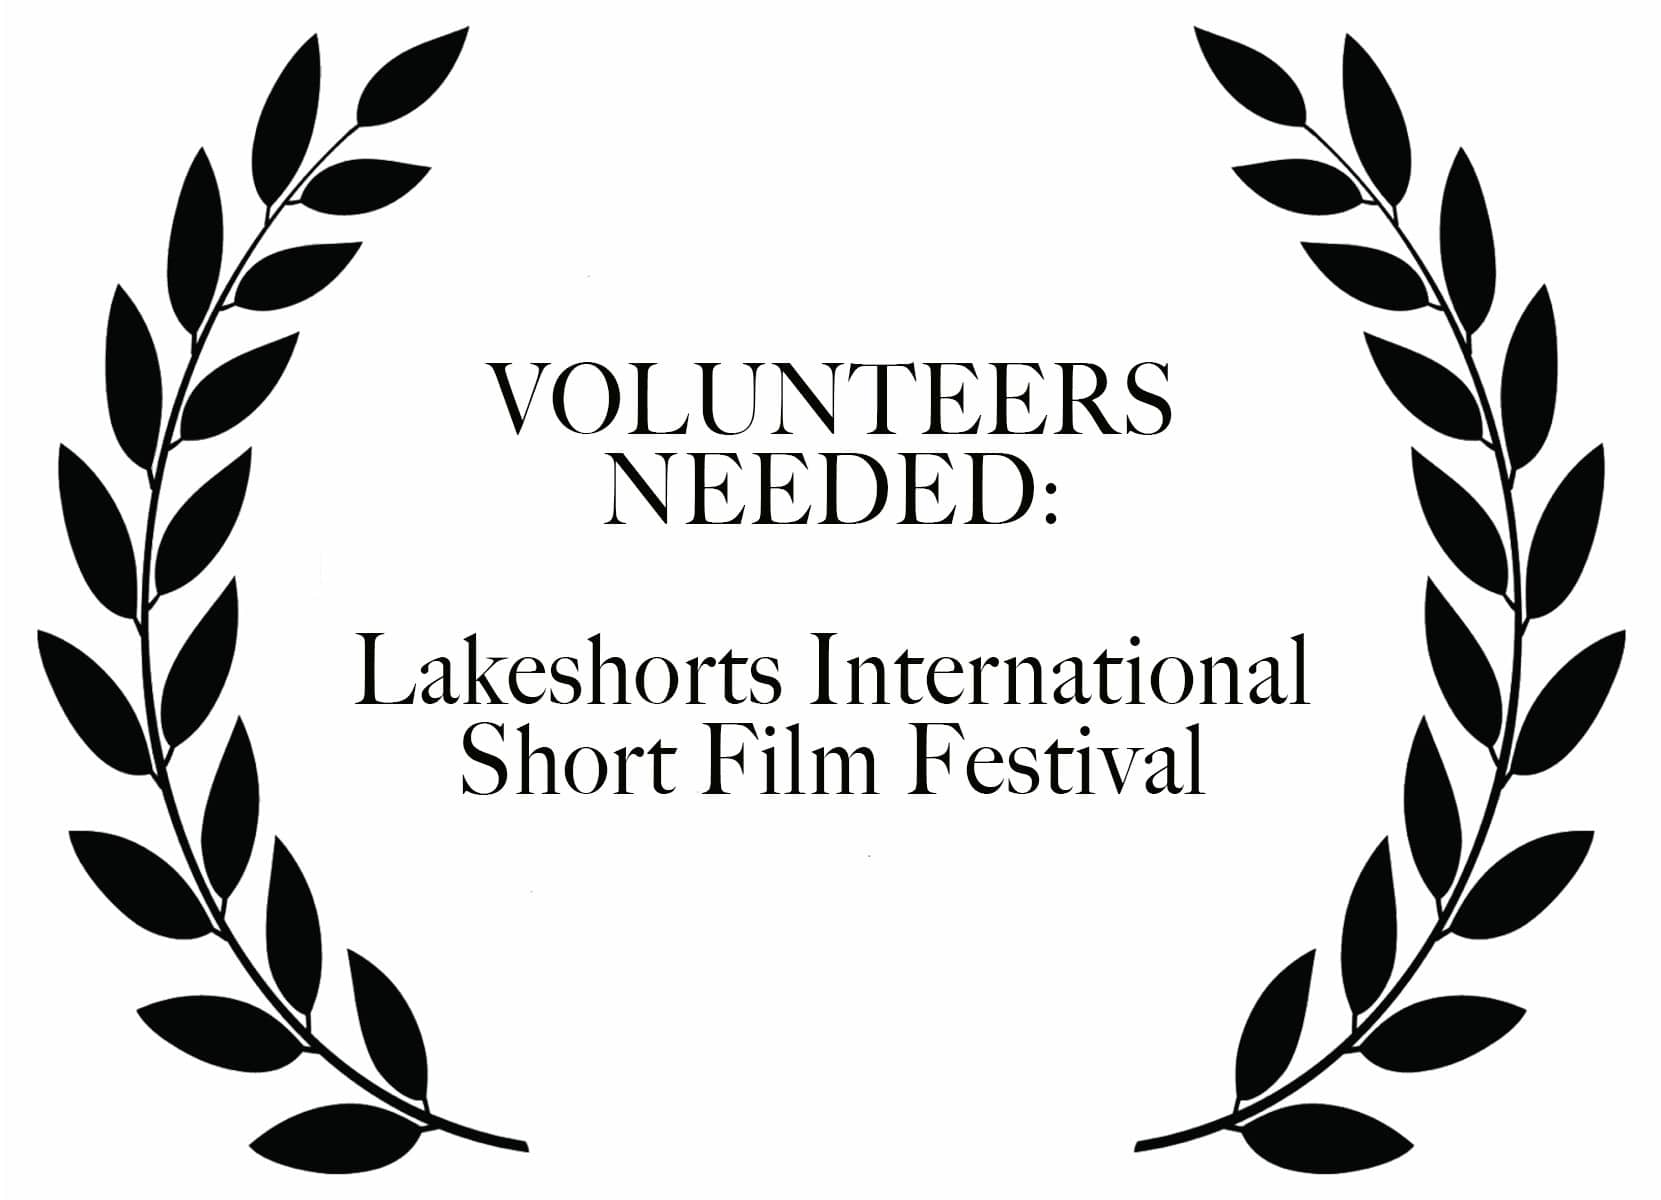 Call for Lakeshorts Volunteers!